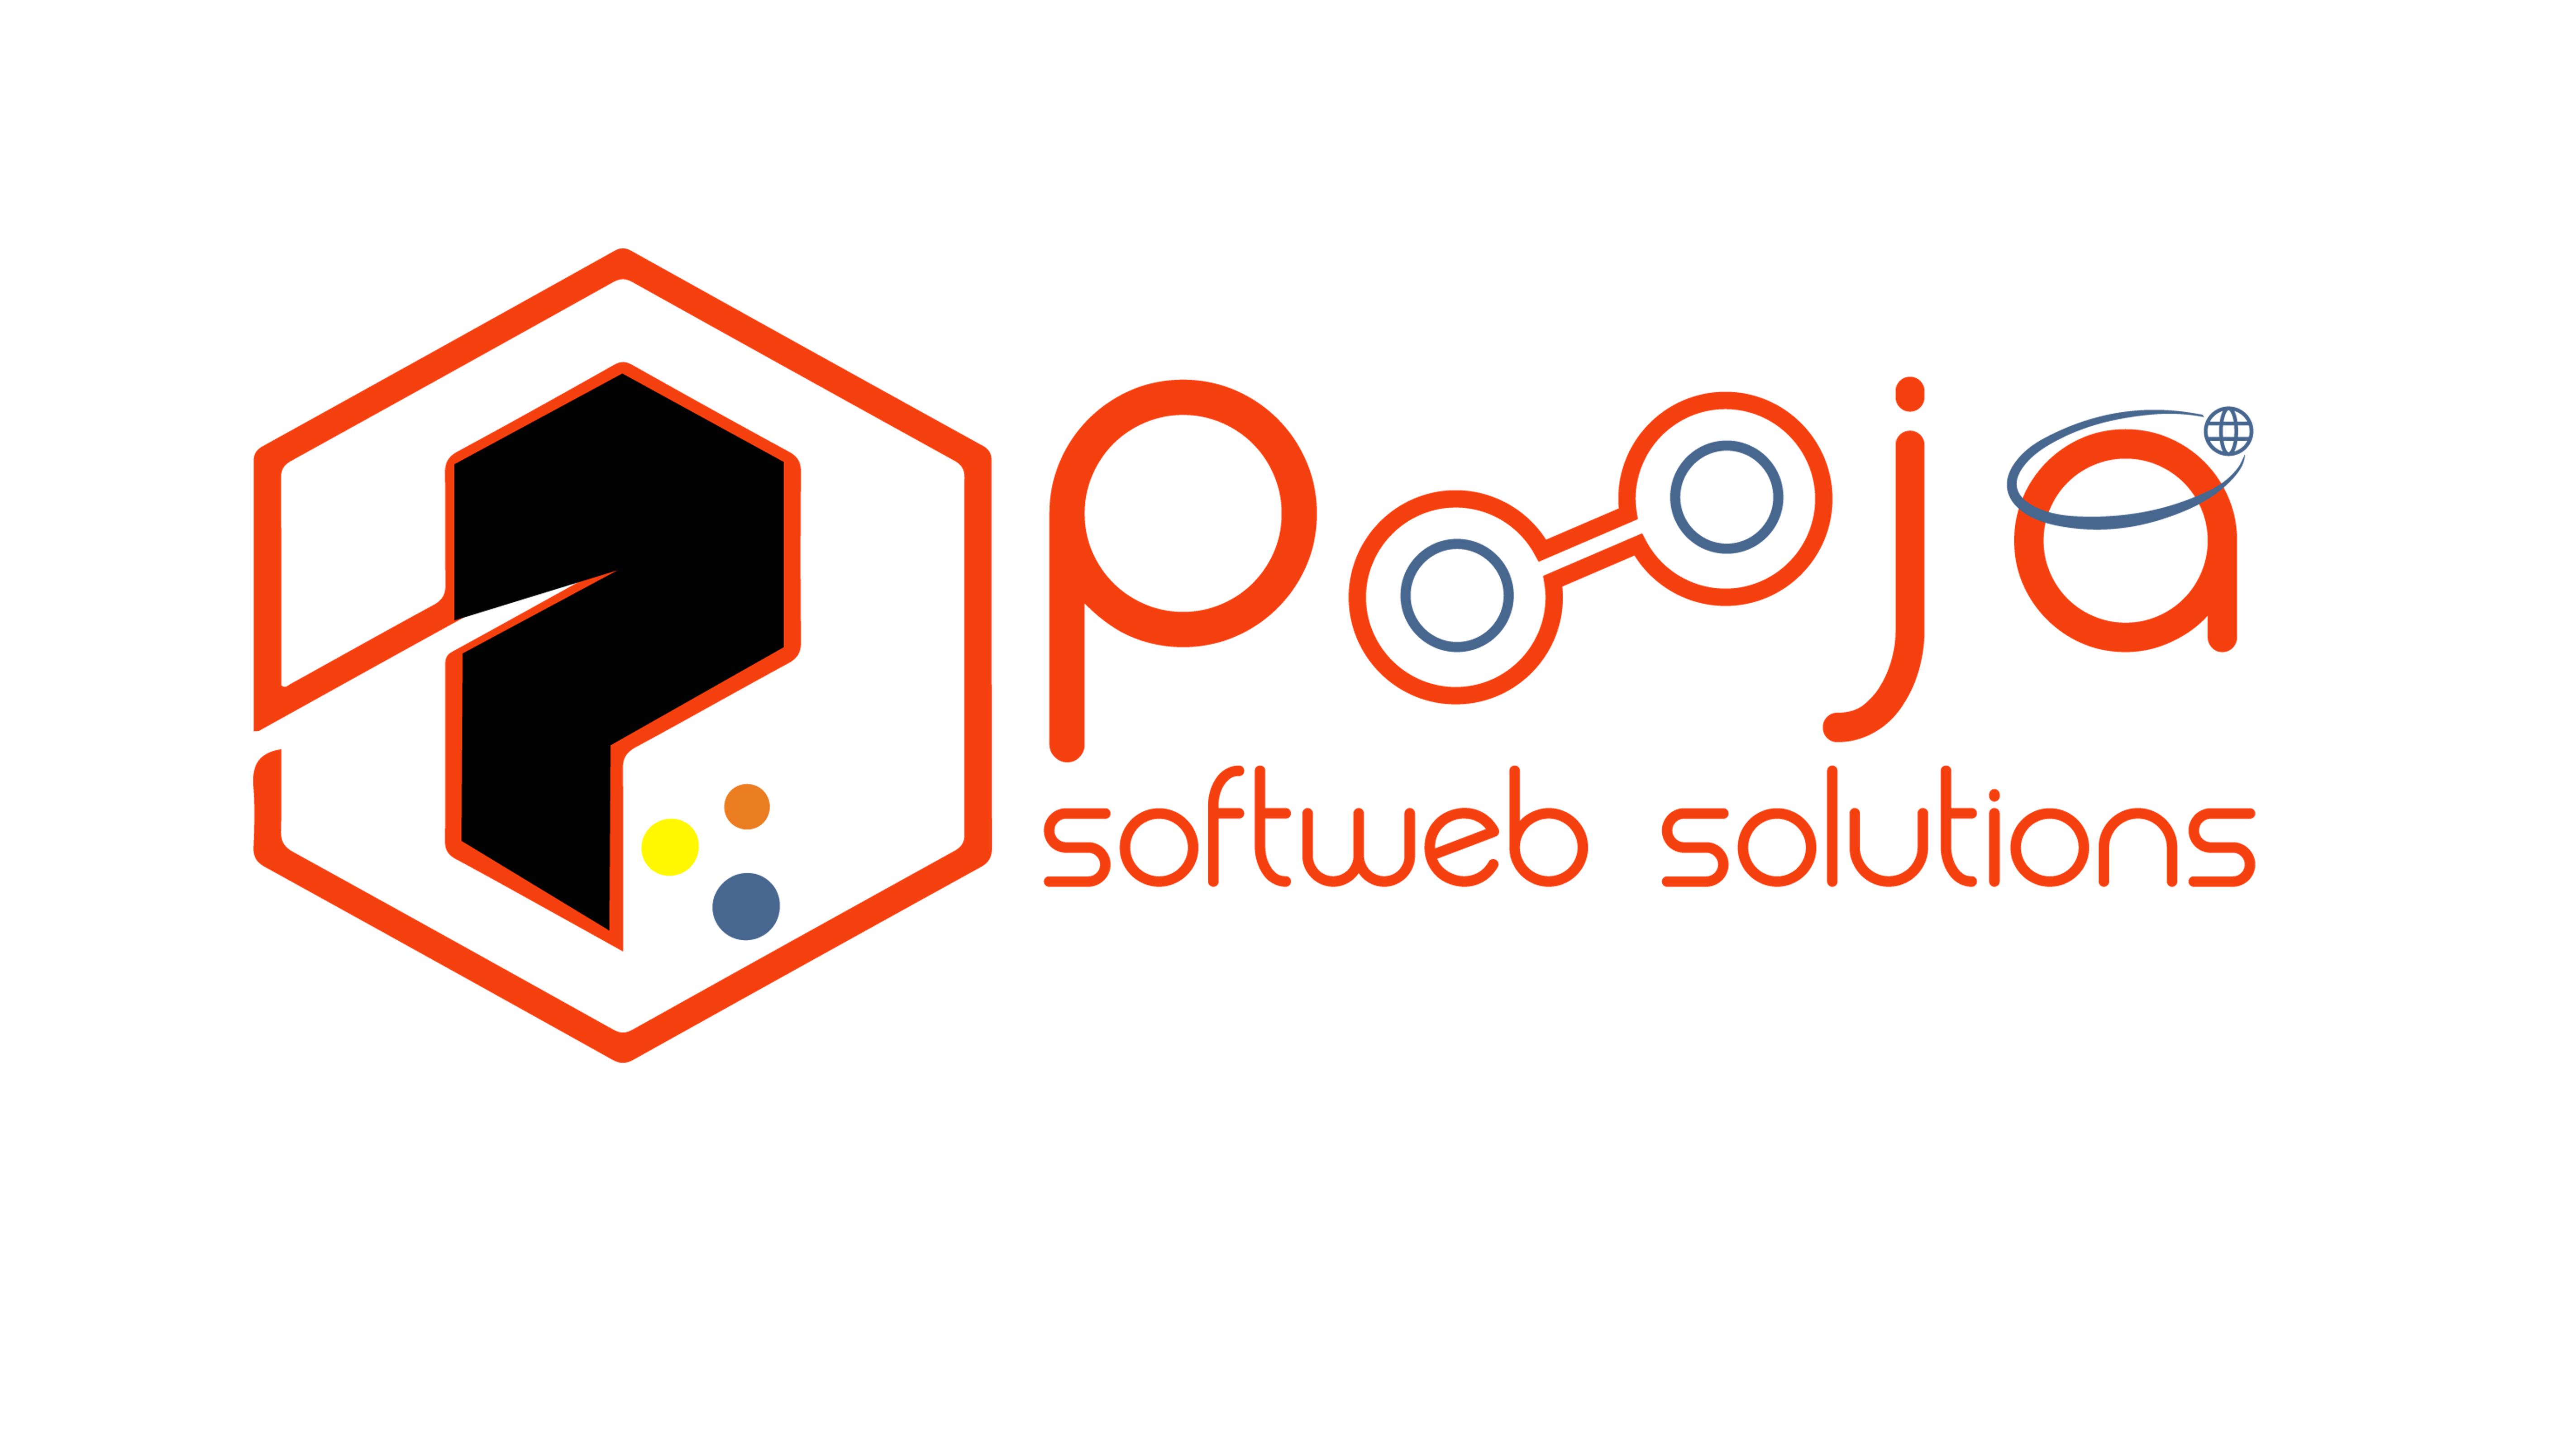 poojasoftwebsolutions profile on Qualified.One